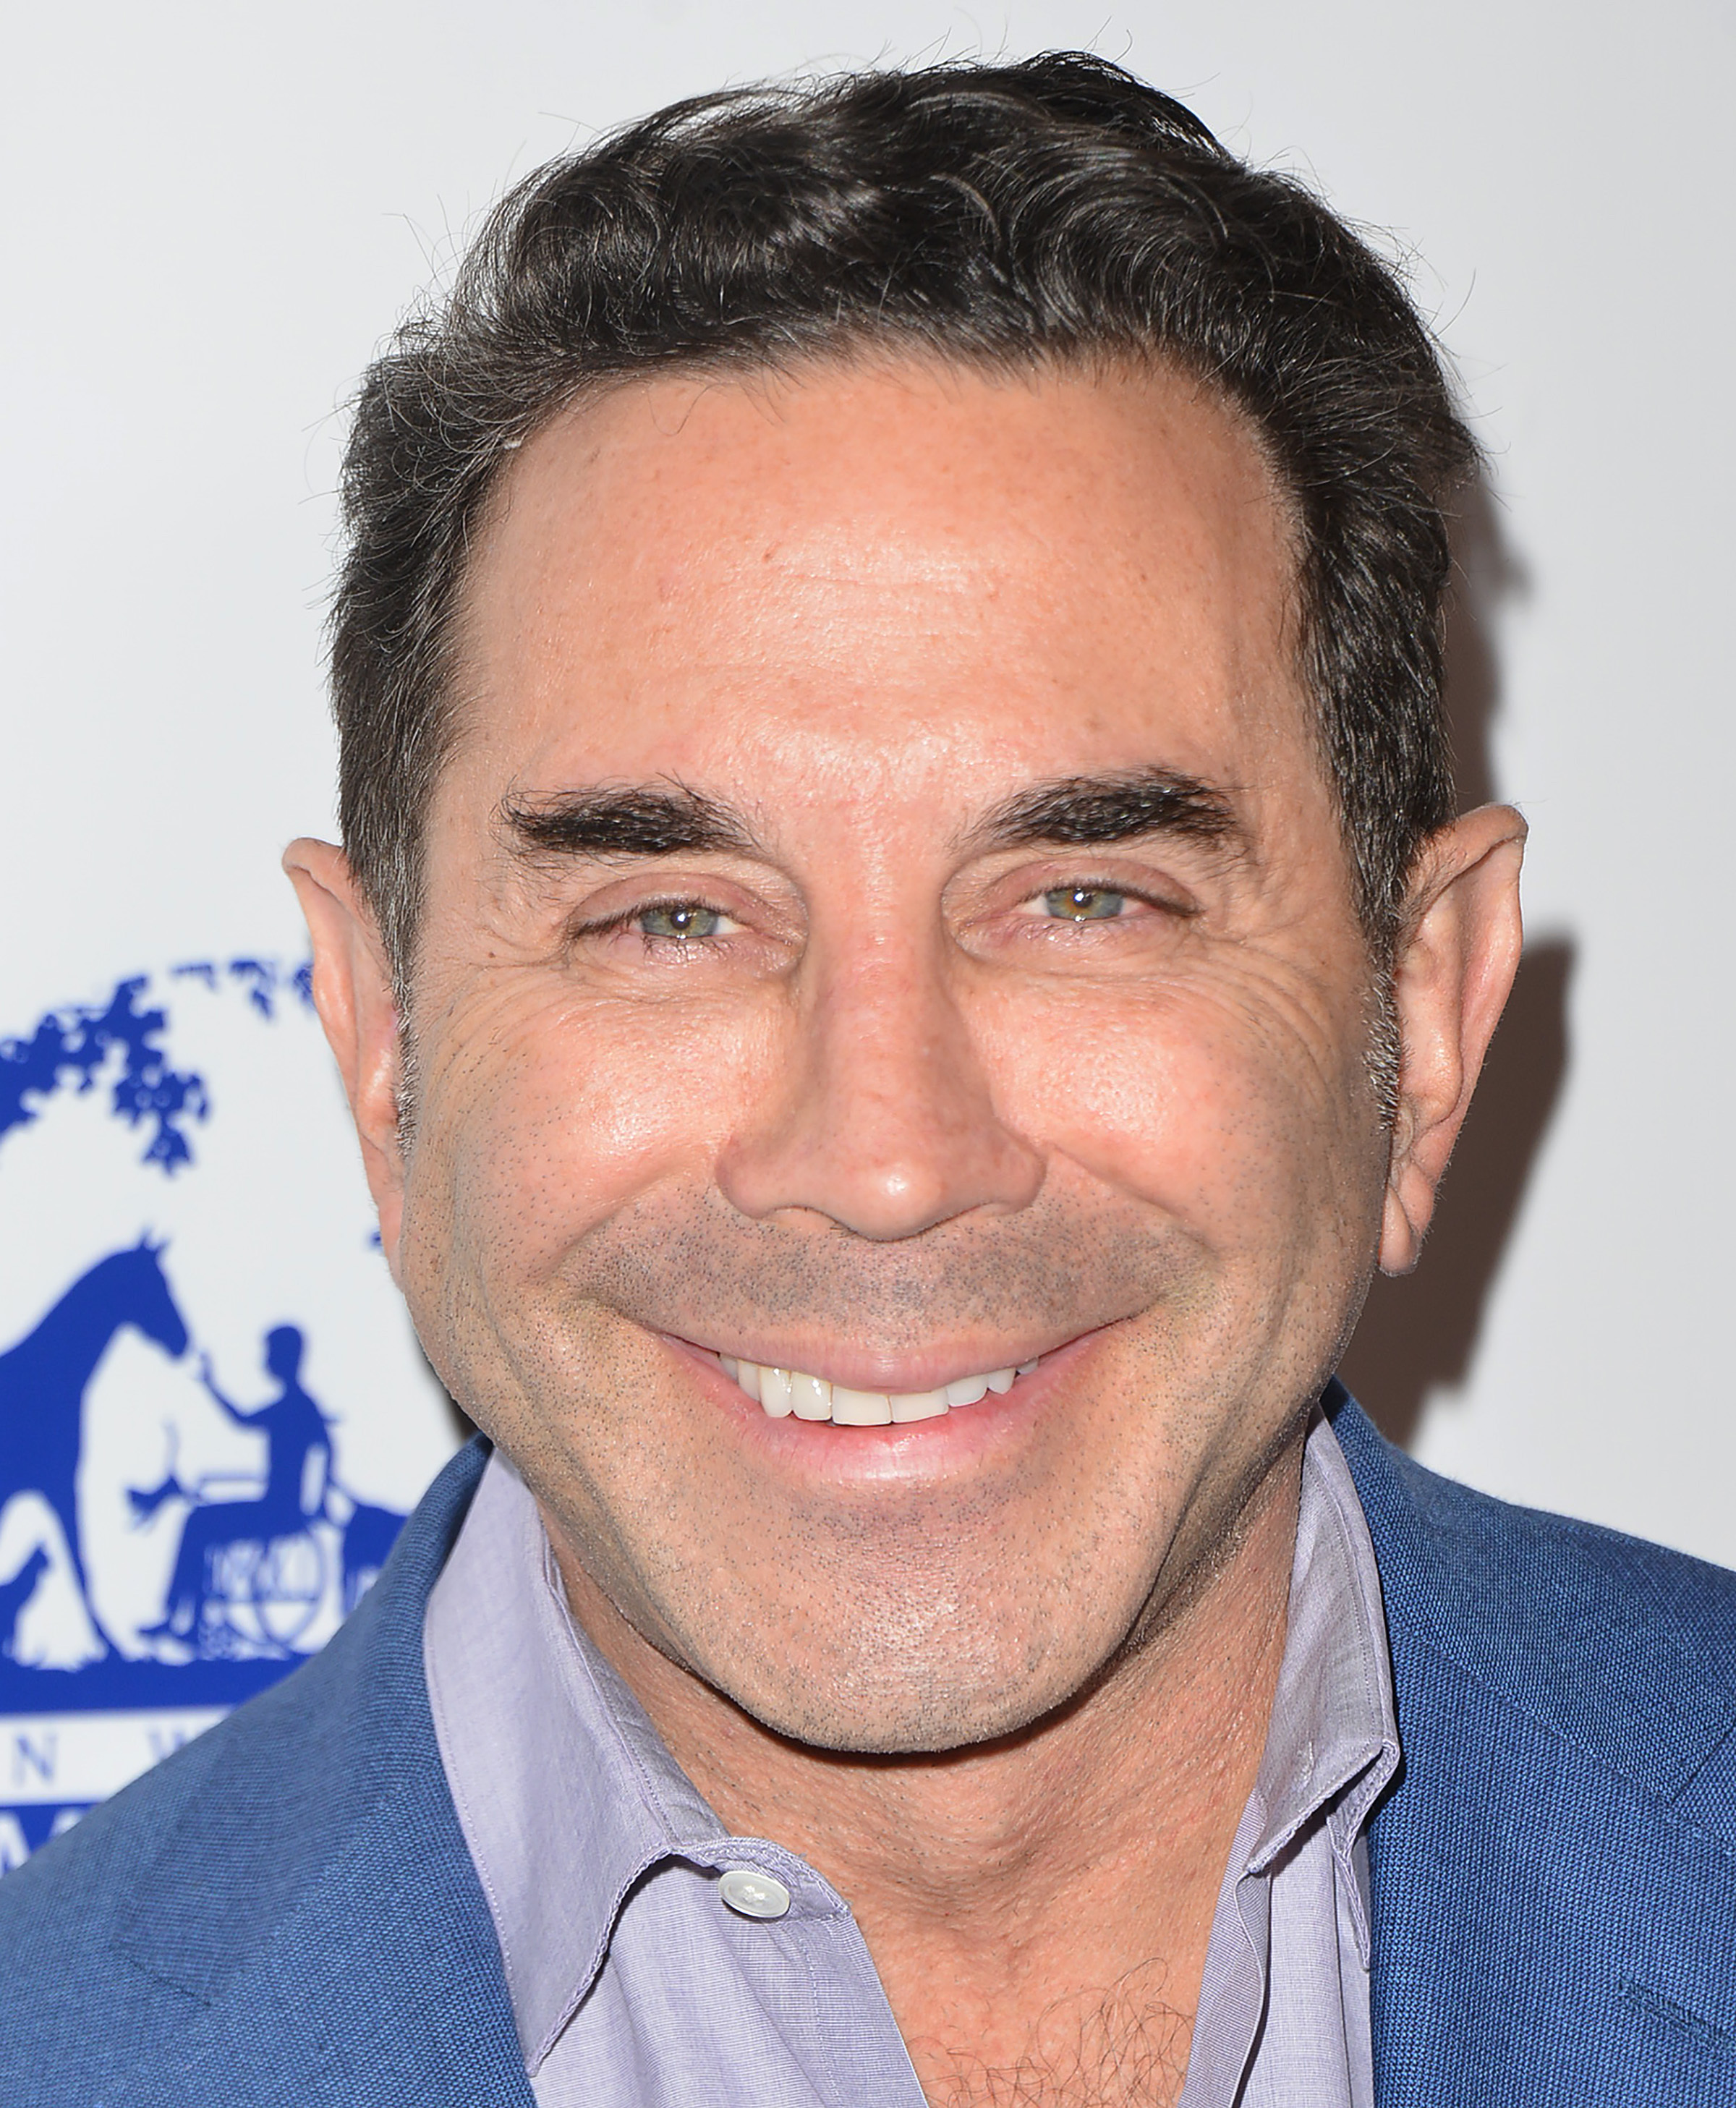 <p>"Botched" star Dr. Paul Nassif confessed in November 2019 that he quietly underwent a facelift in 2018. He admitted he felt self-conscious about extra skin around his face and jawline after he lost weight. "The excess skin, especially in my neck, was driving me crazy," he told Page Six.</p>